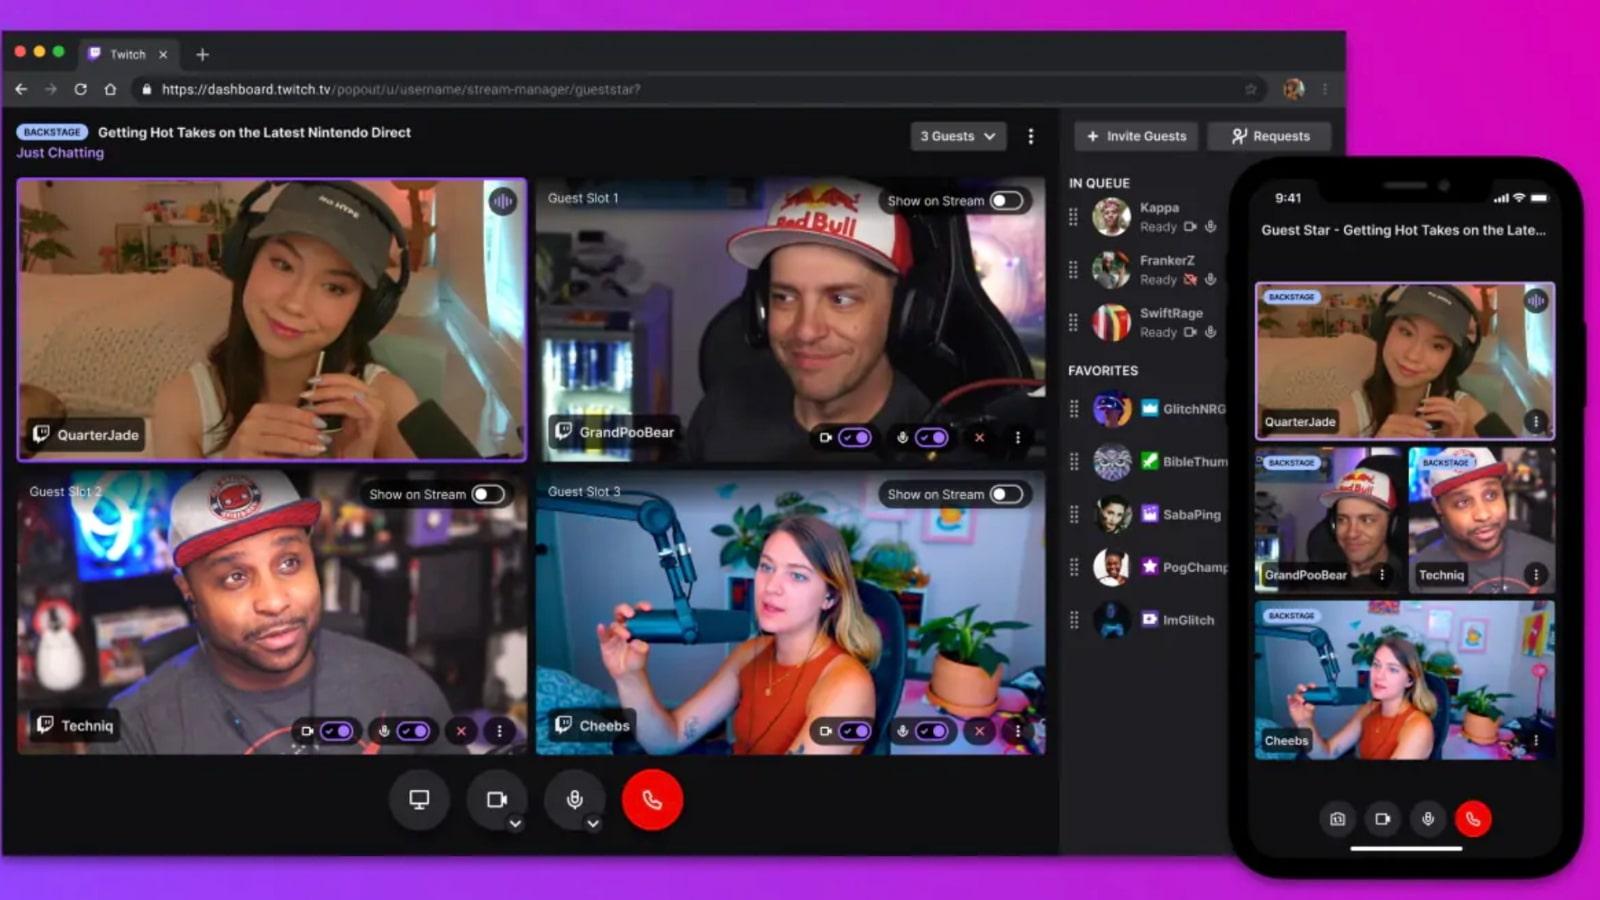 5+ Just Chatting Stream Ideas to be Successful on Twitch